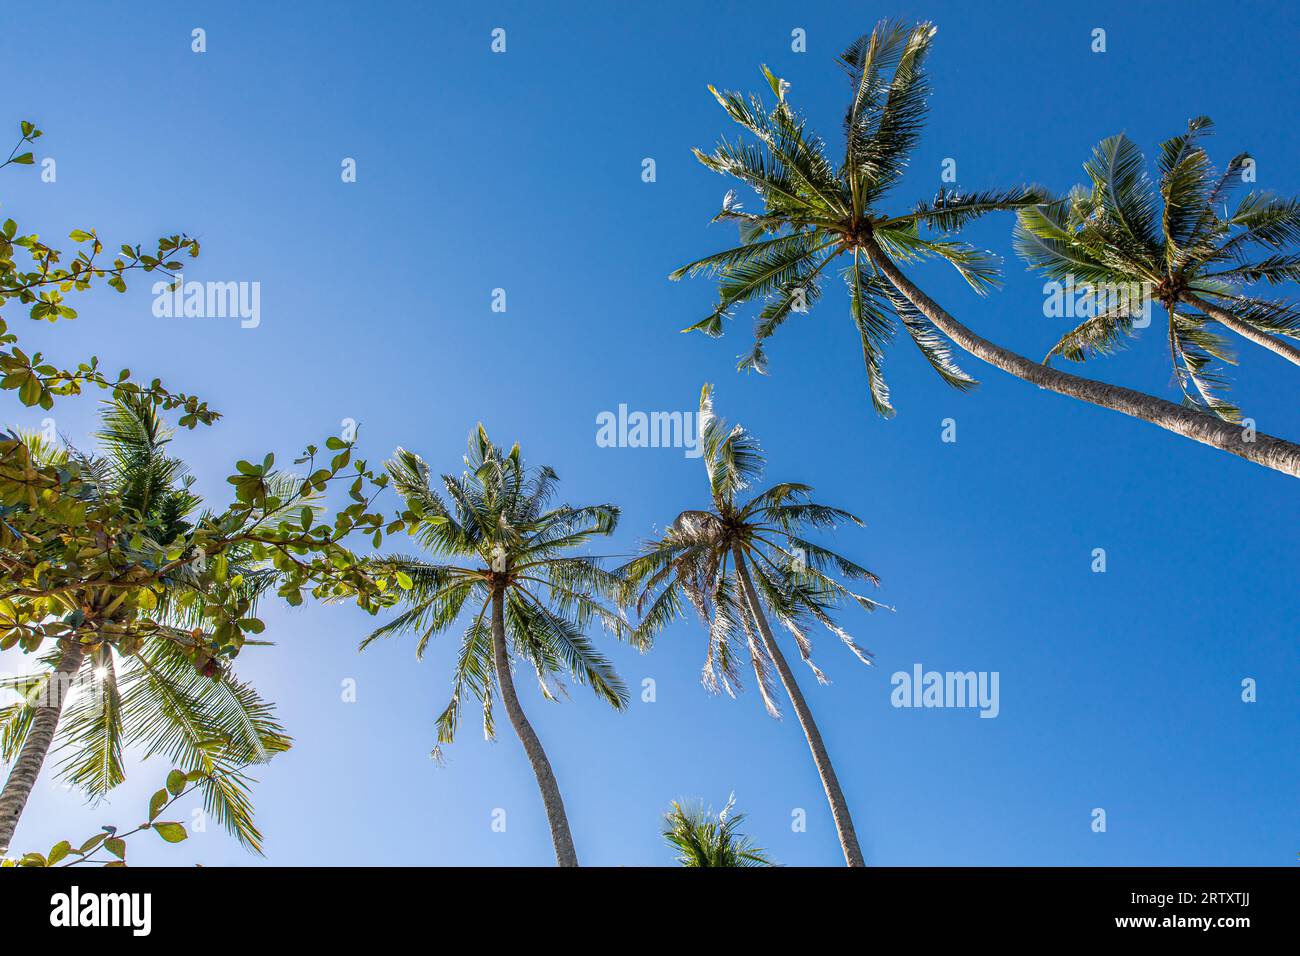 Coconut Palm Tree and Blue Sky, Koh Chang Island, Thailand. Stock Photo